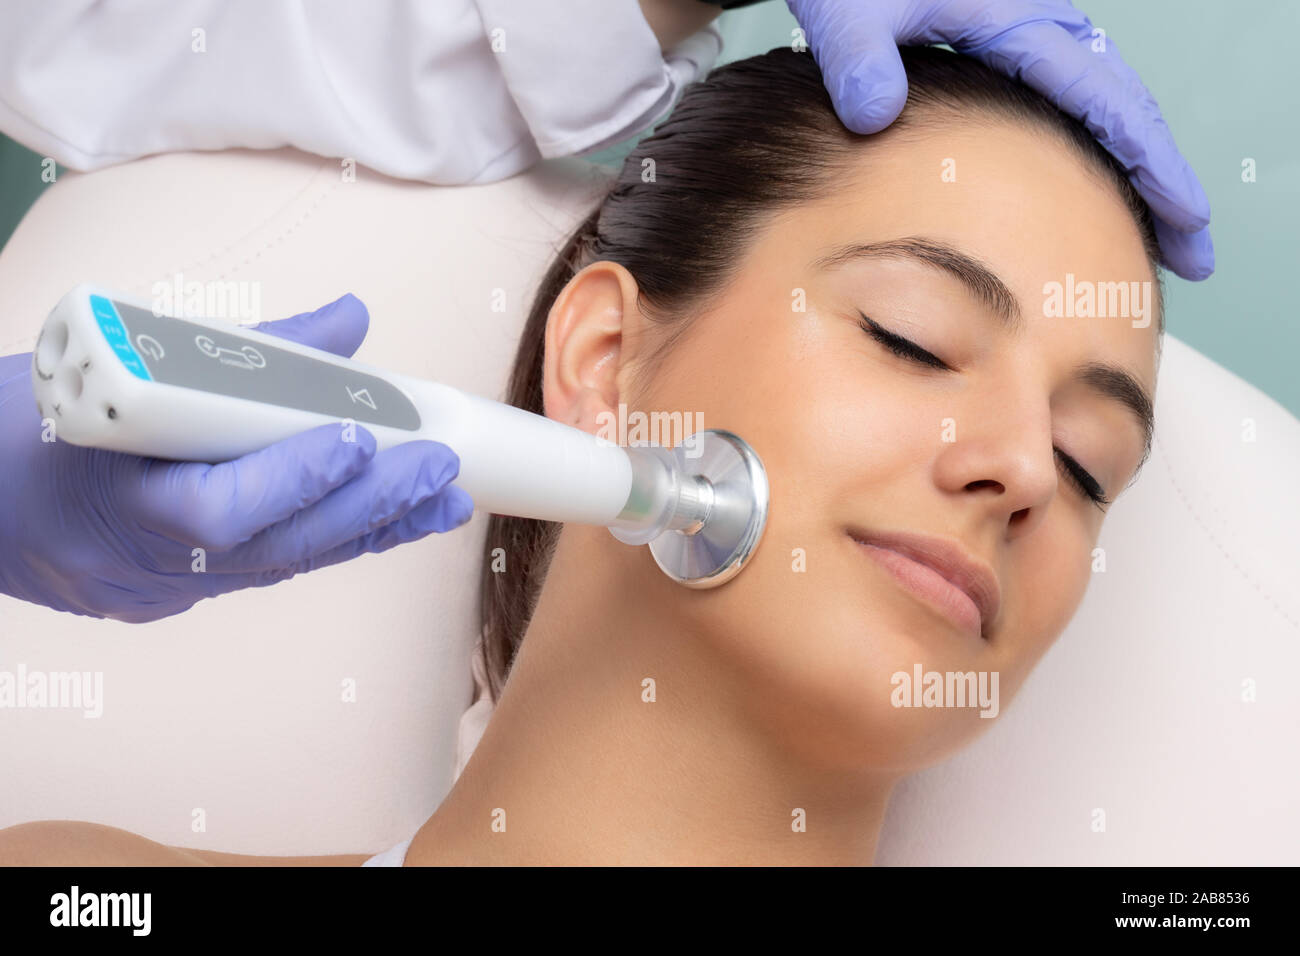 Close up of therapist doing facial mesotherapy treatment with flat head plasma pen. Electric impulse on woman's cheek stimulating new collagen. Stock Photo